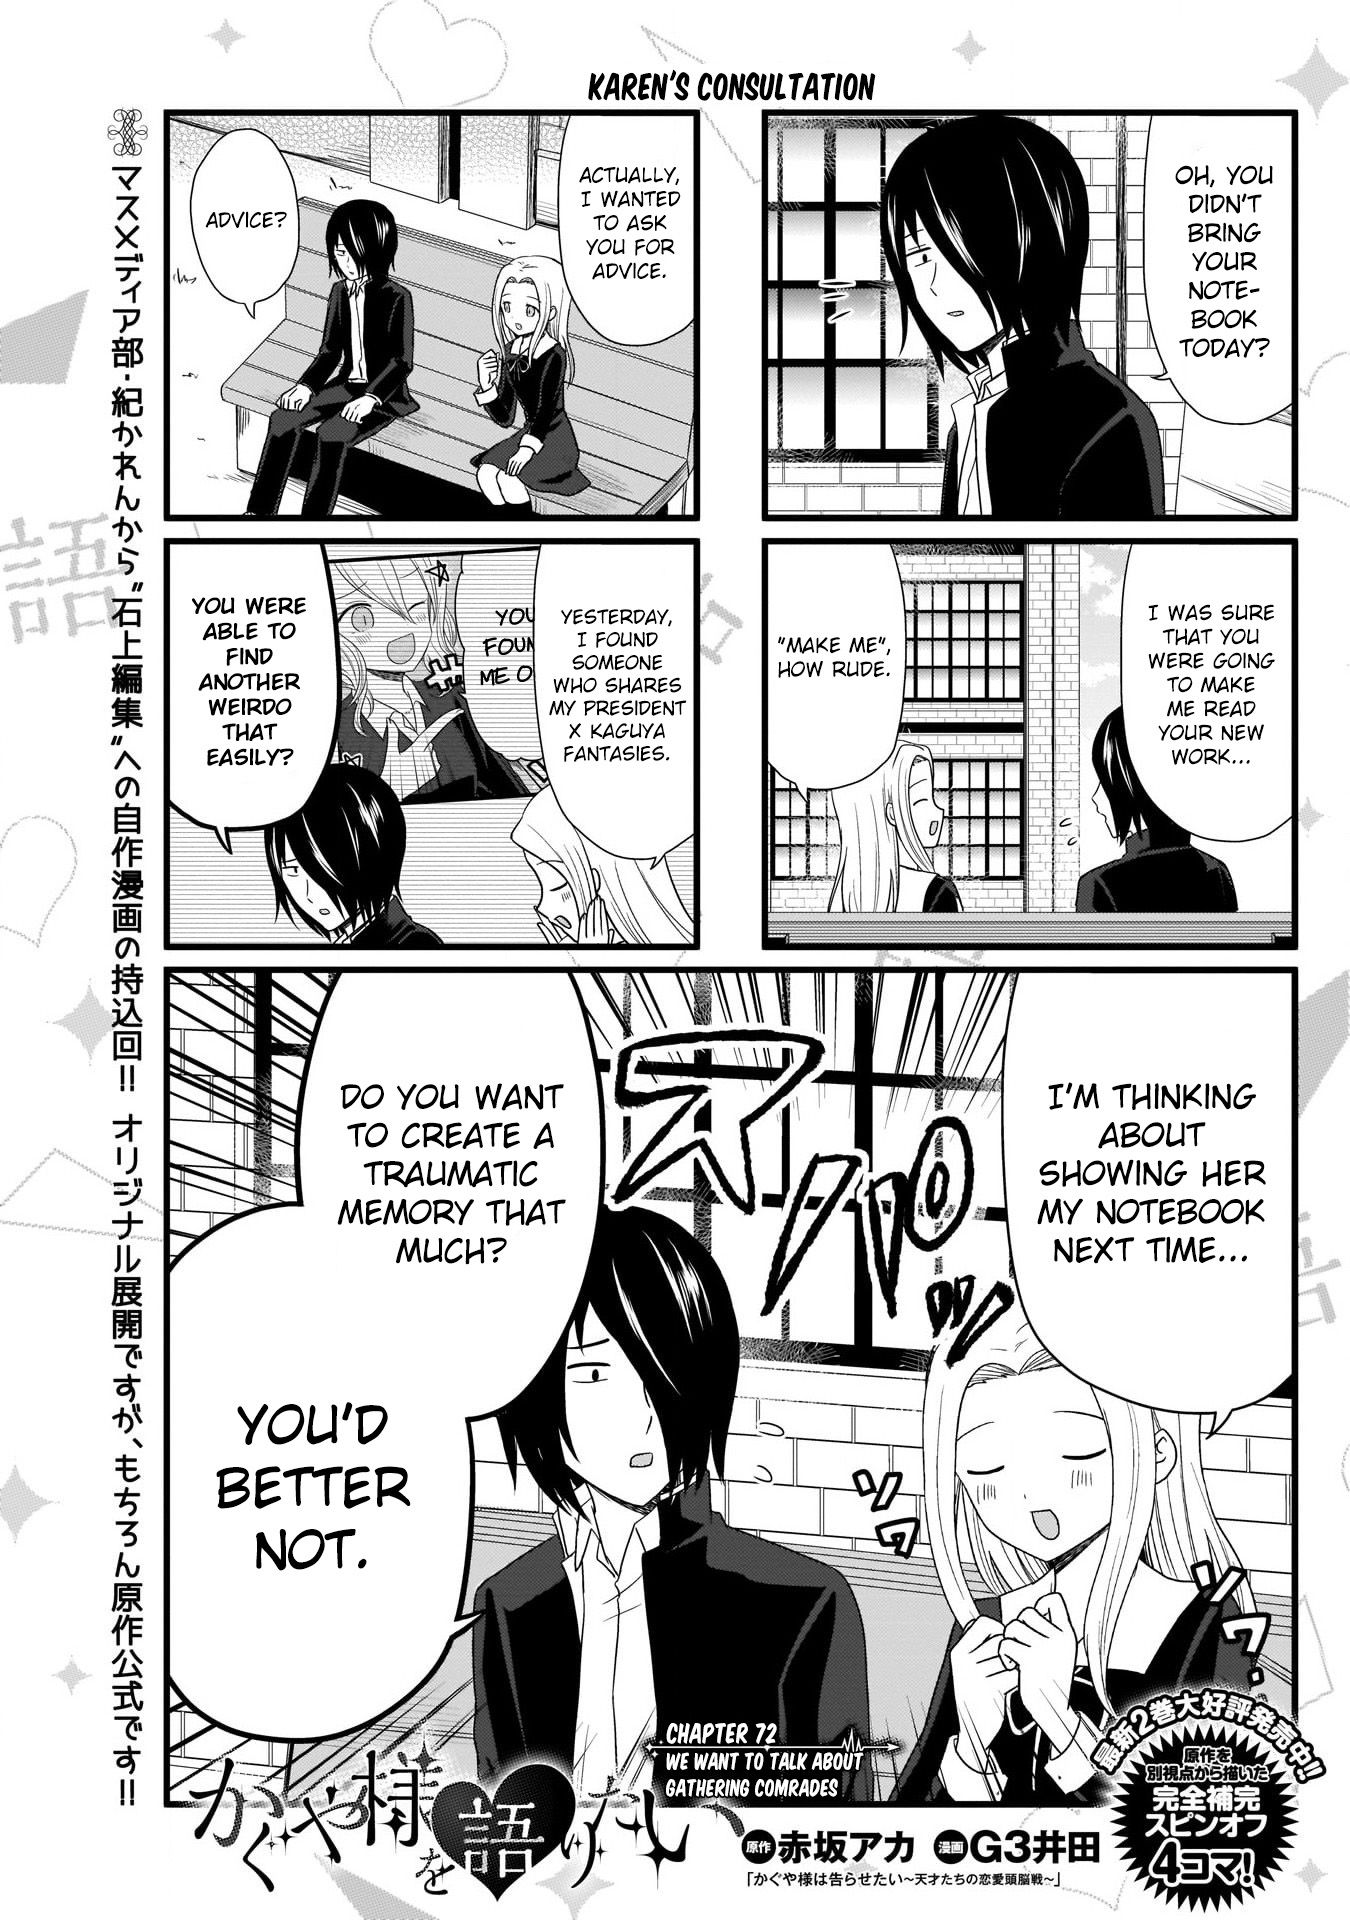 we_want_to_talk_about_kaguya_72_2